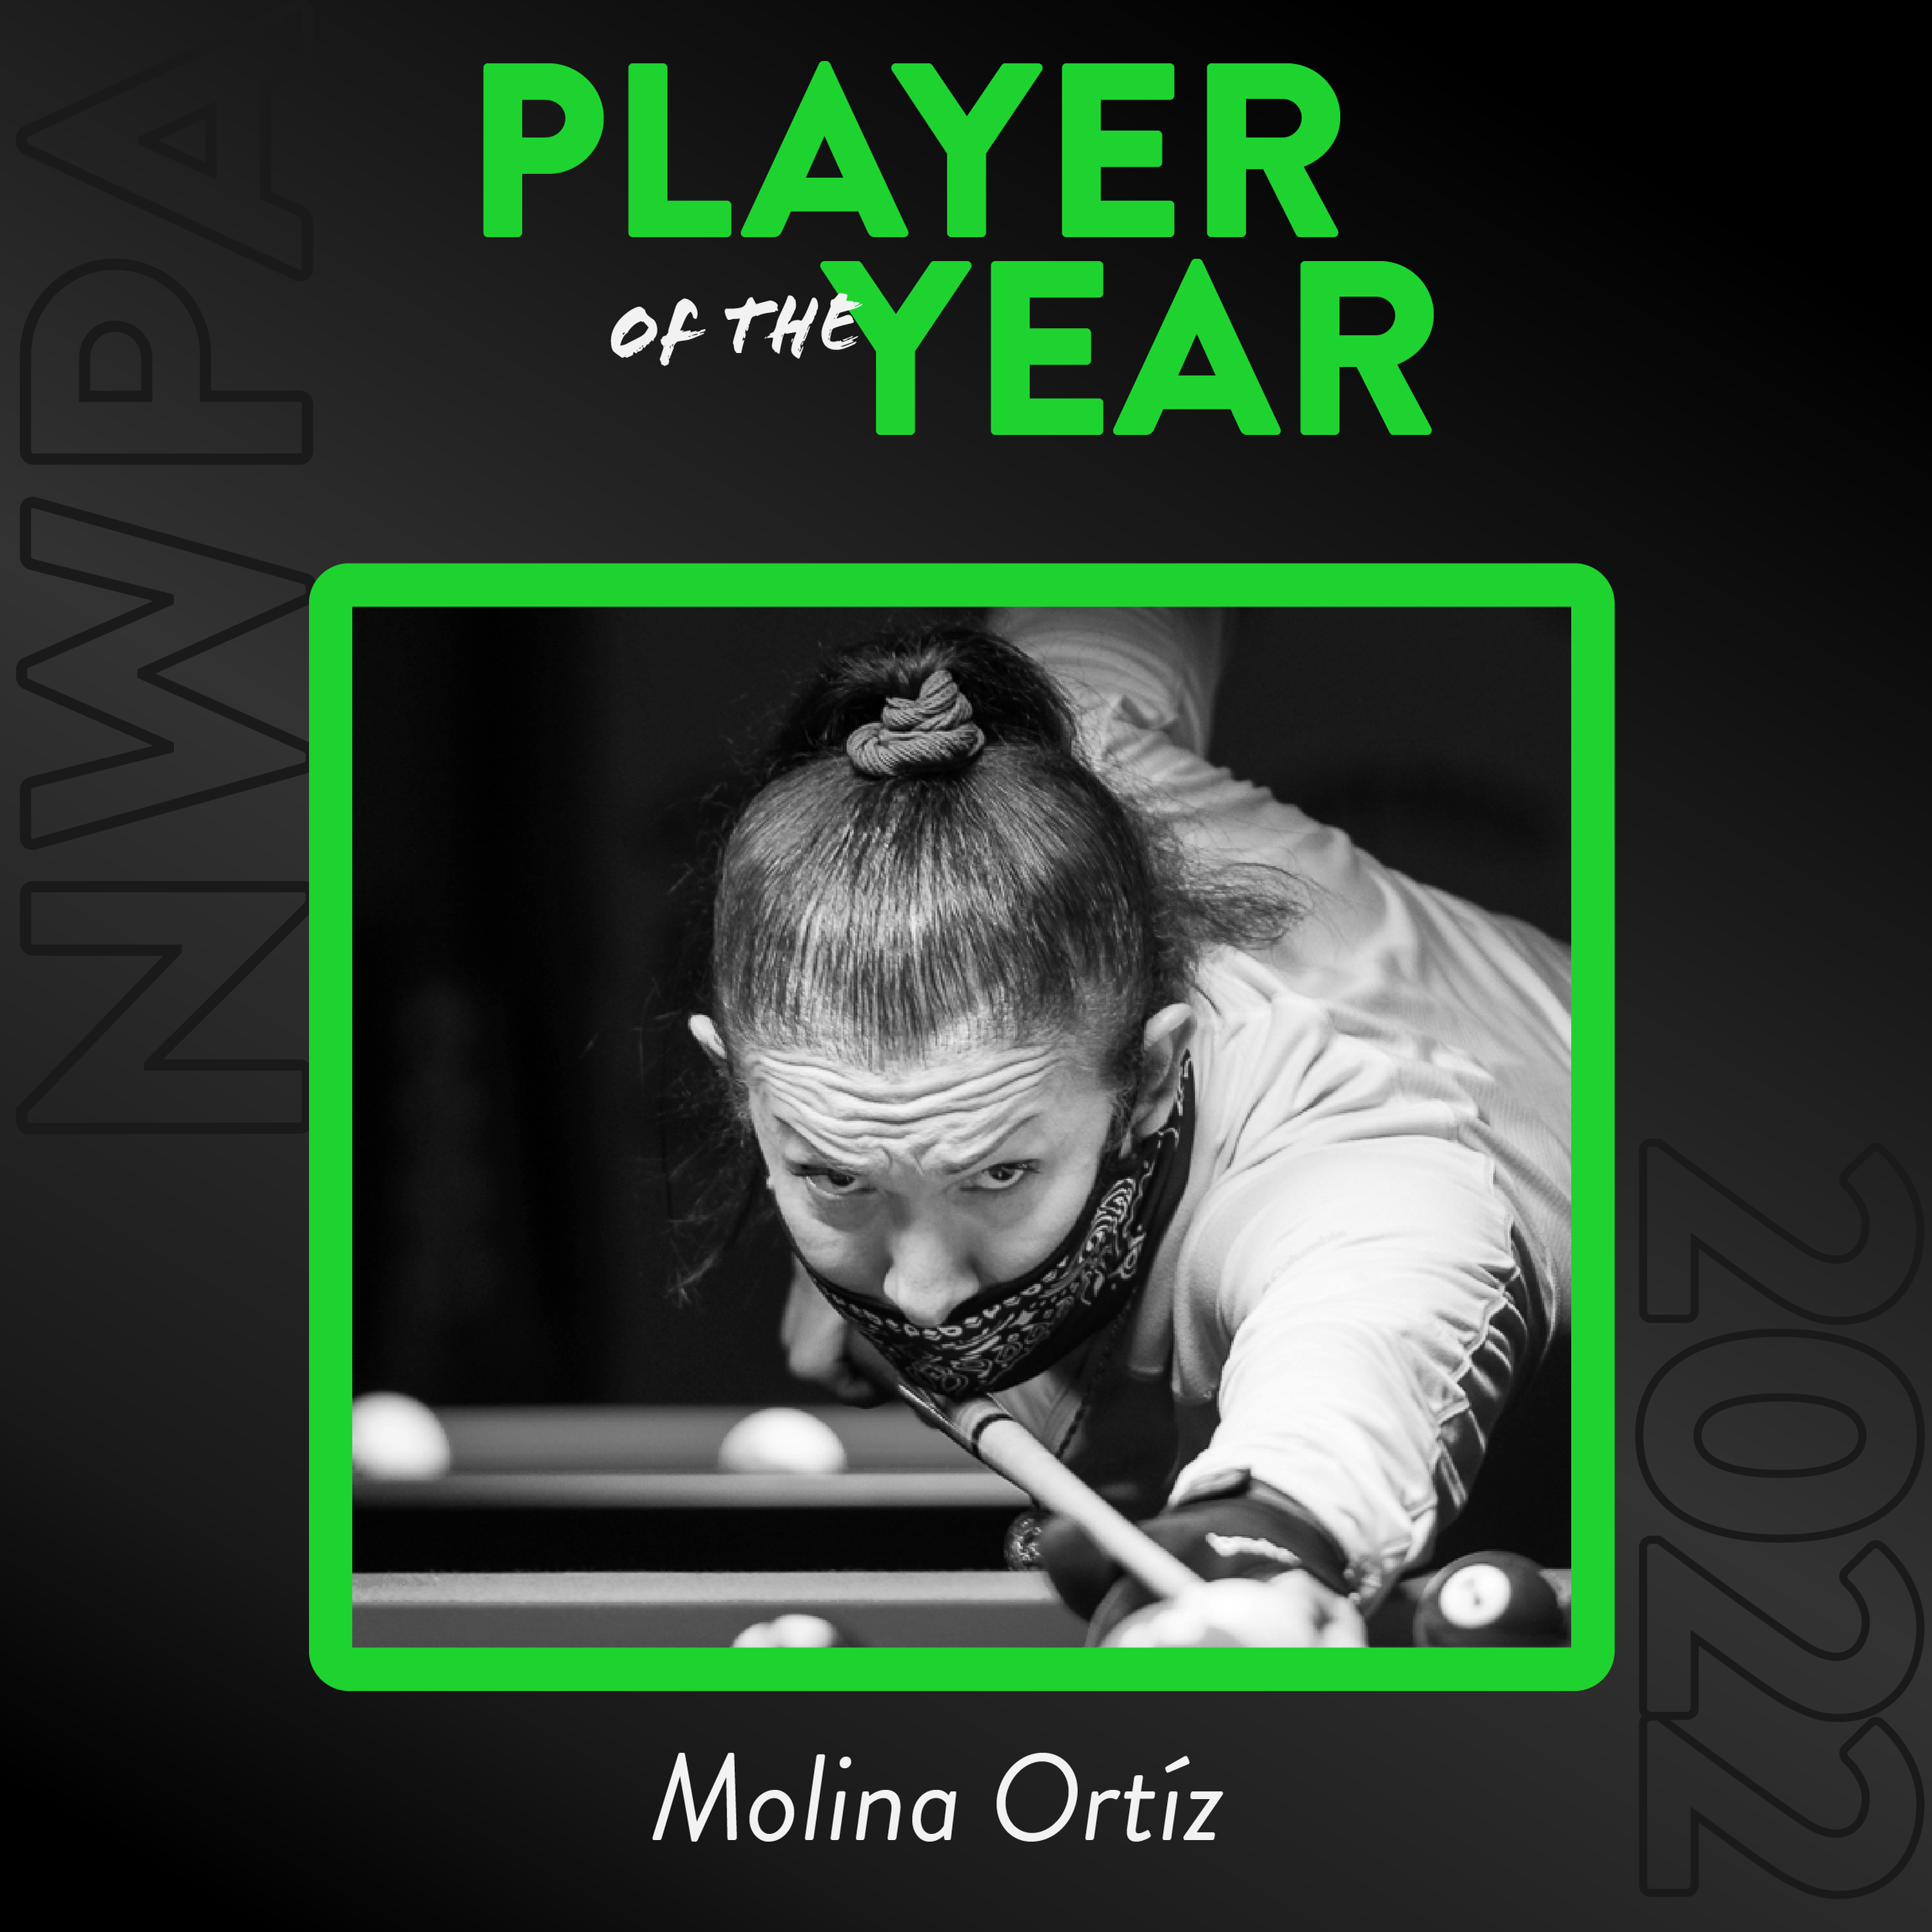 Player of the Year - Molina Ortiz